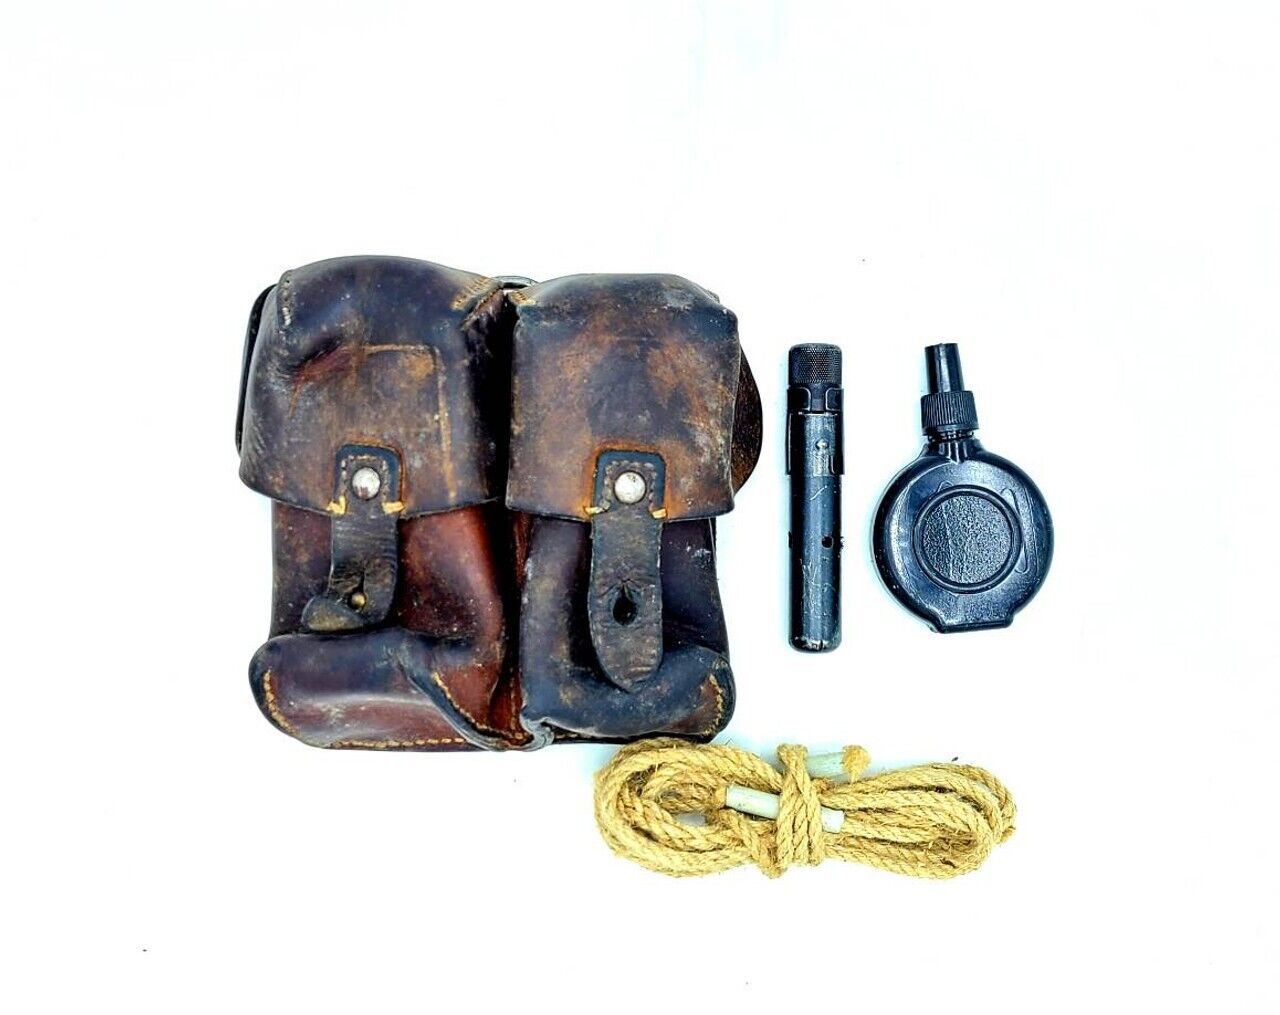 SKS Accessory Pack - Contains 1 Cleaning Kit, 1 Oil Bottle , One Twine and More